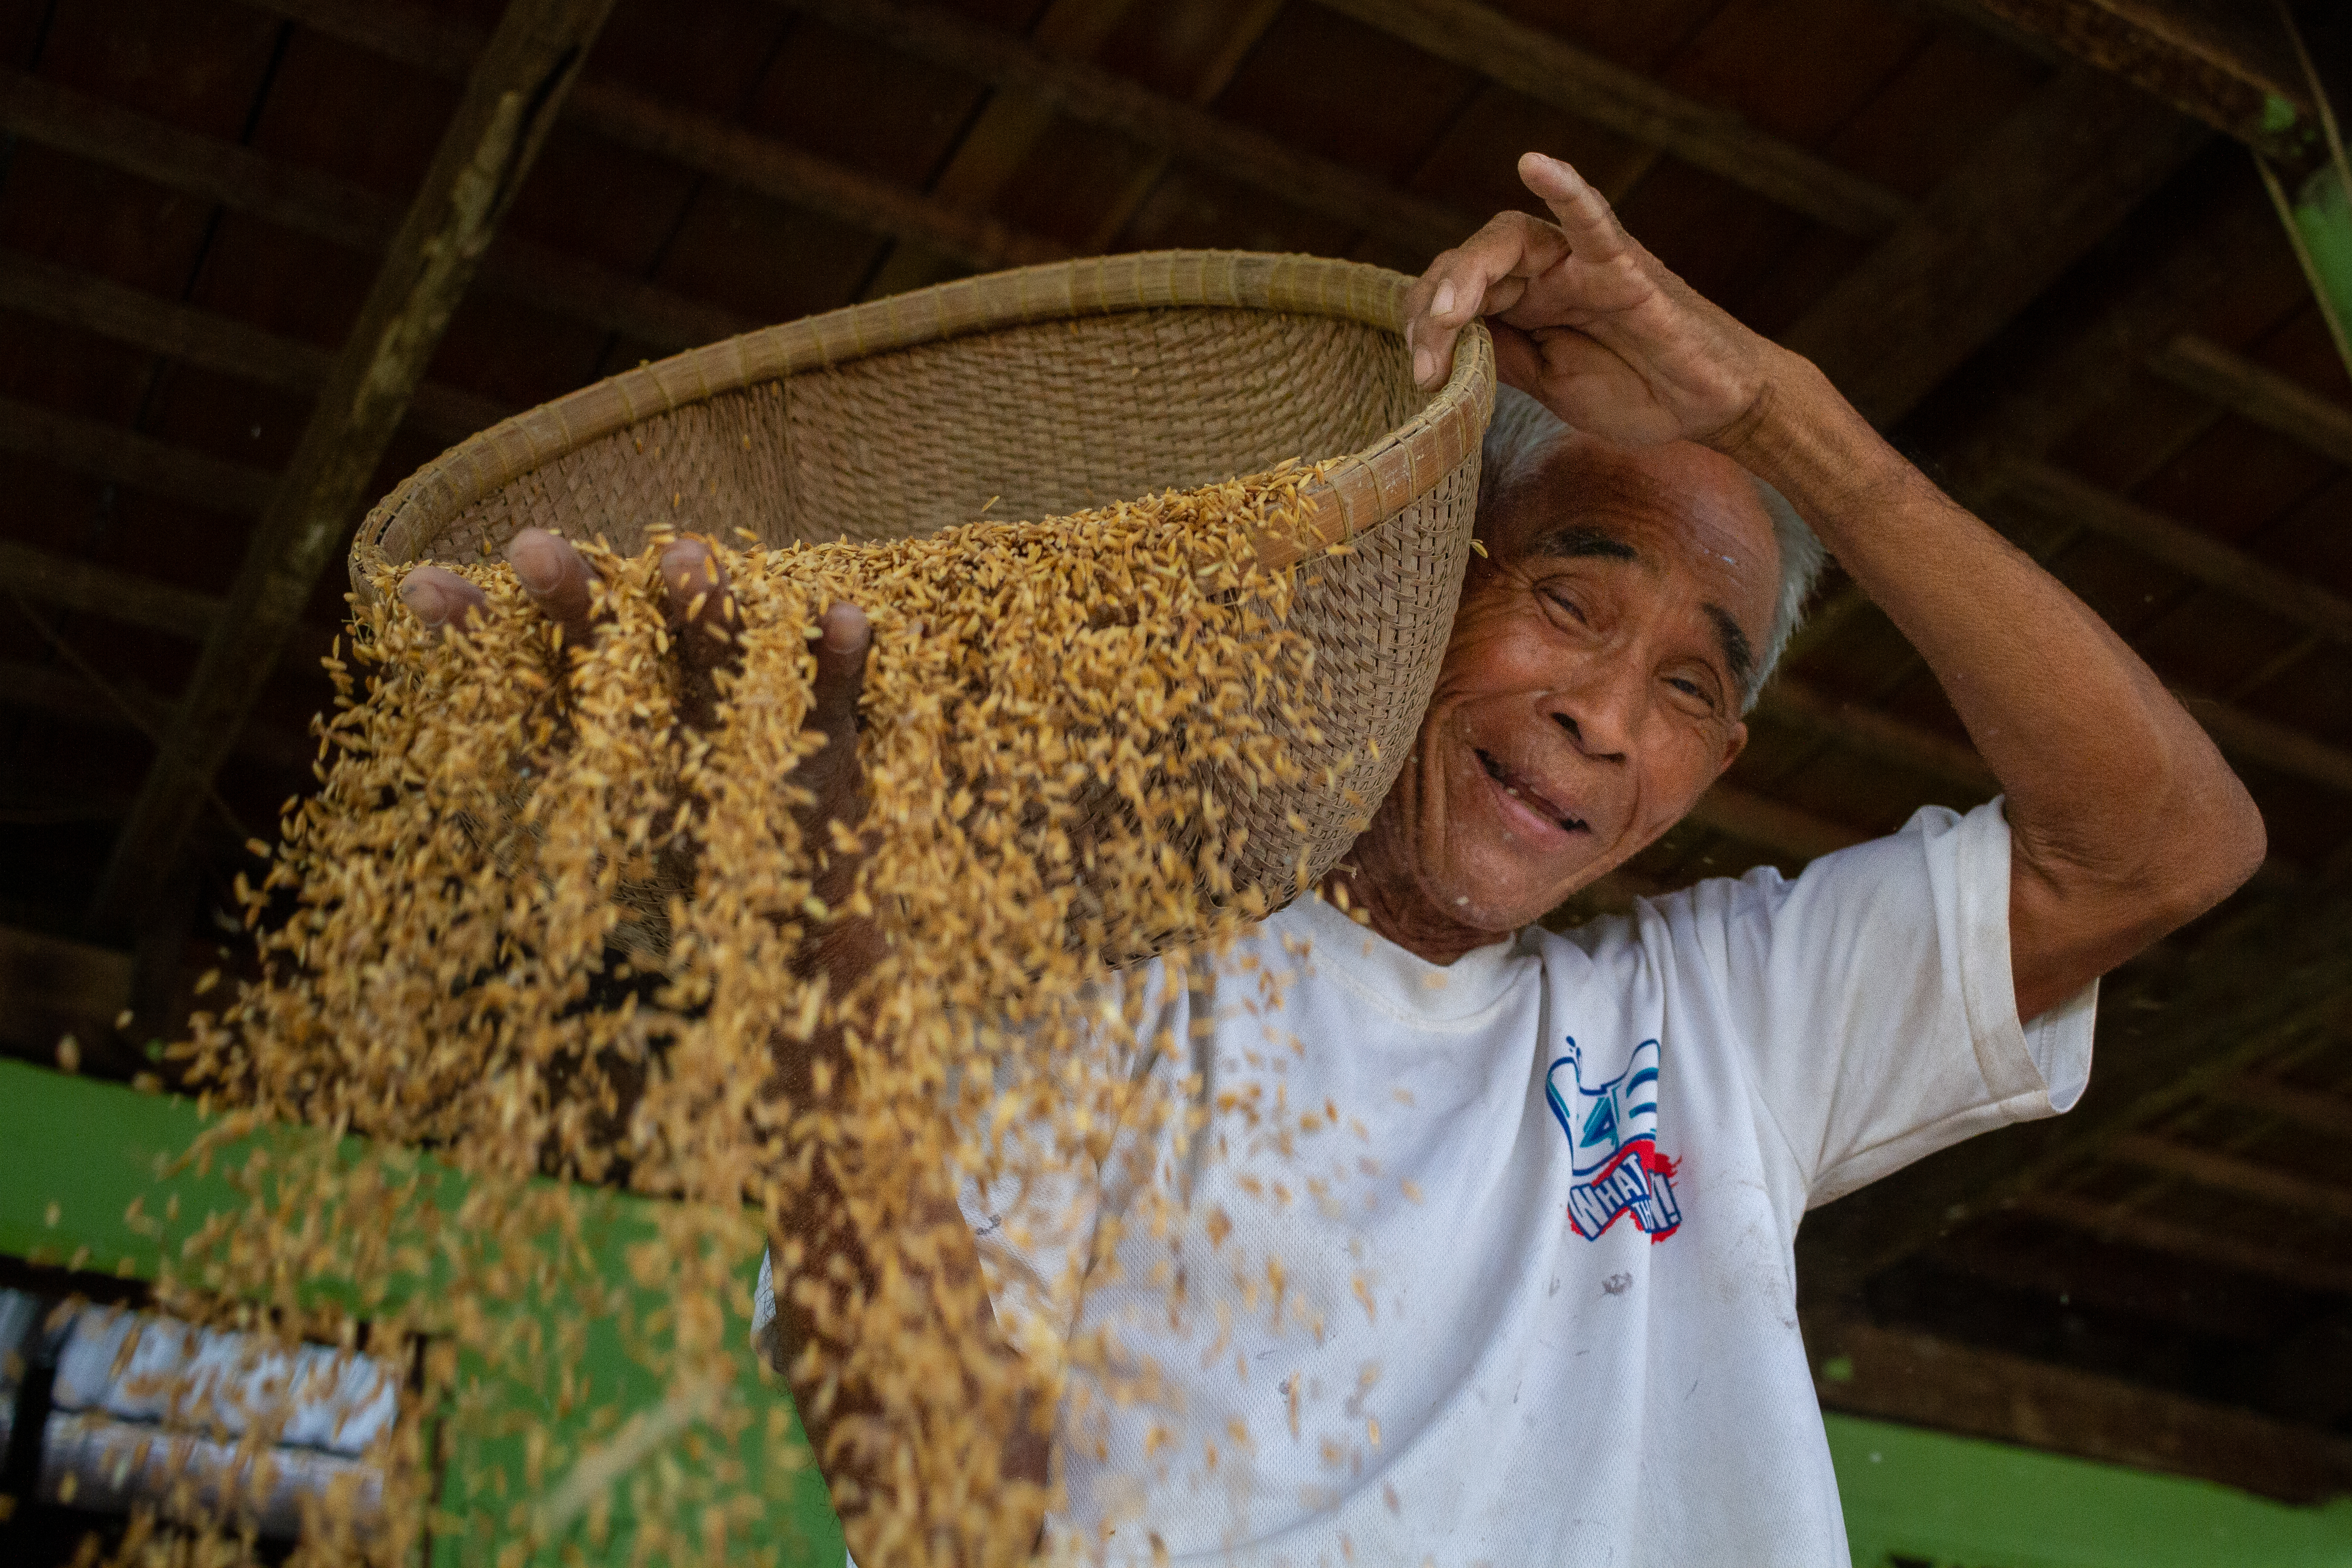 Phean Sorn winnows rice in the shade of his family home in Mesang, Cambodia. Winnowing is done to remove empty rice husks and other impurities from the unmilled rice. This is seed rice to plant the next crop as the rainy season approaches and the largest rice crop of the year begins.